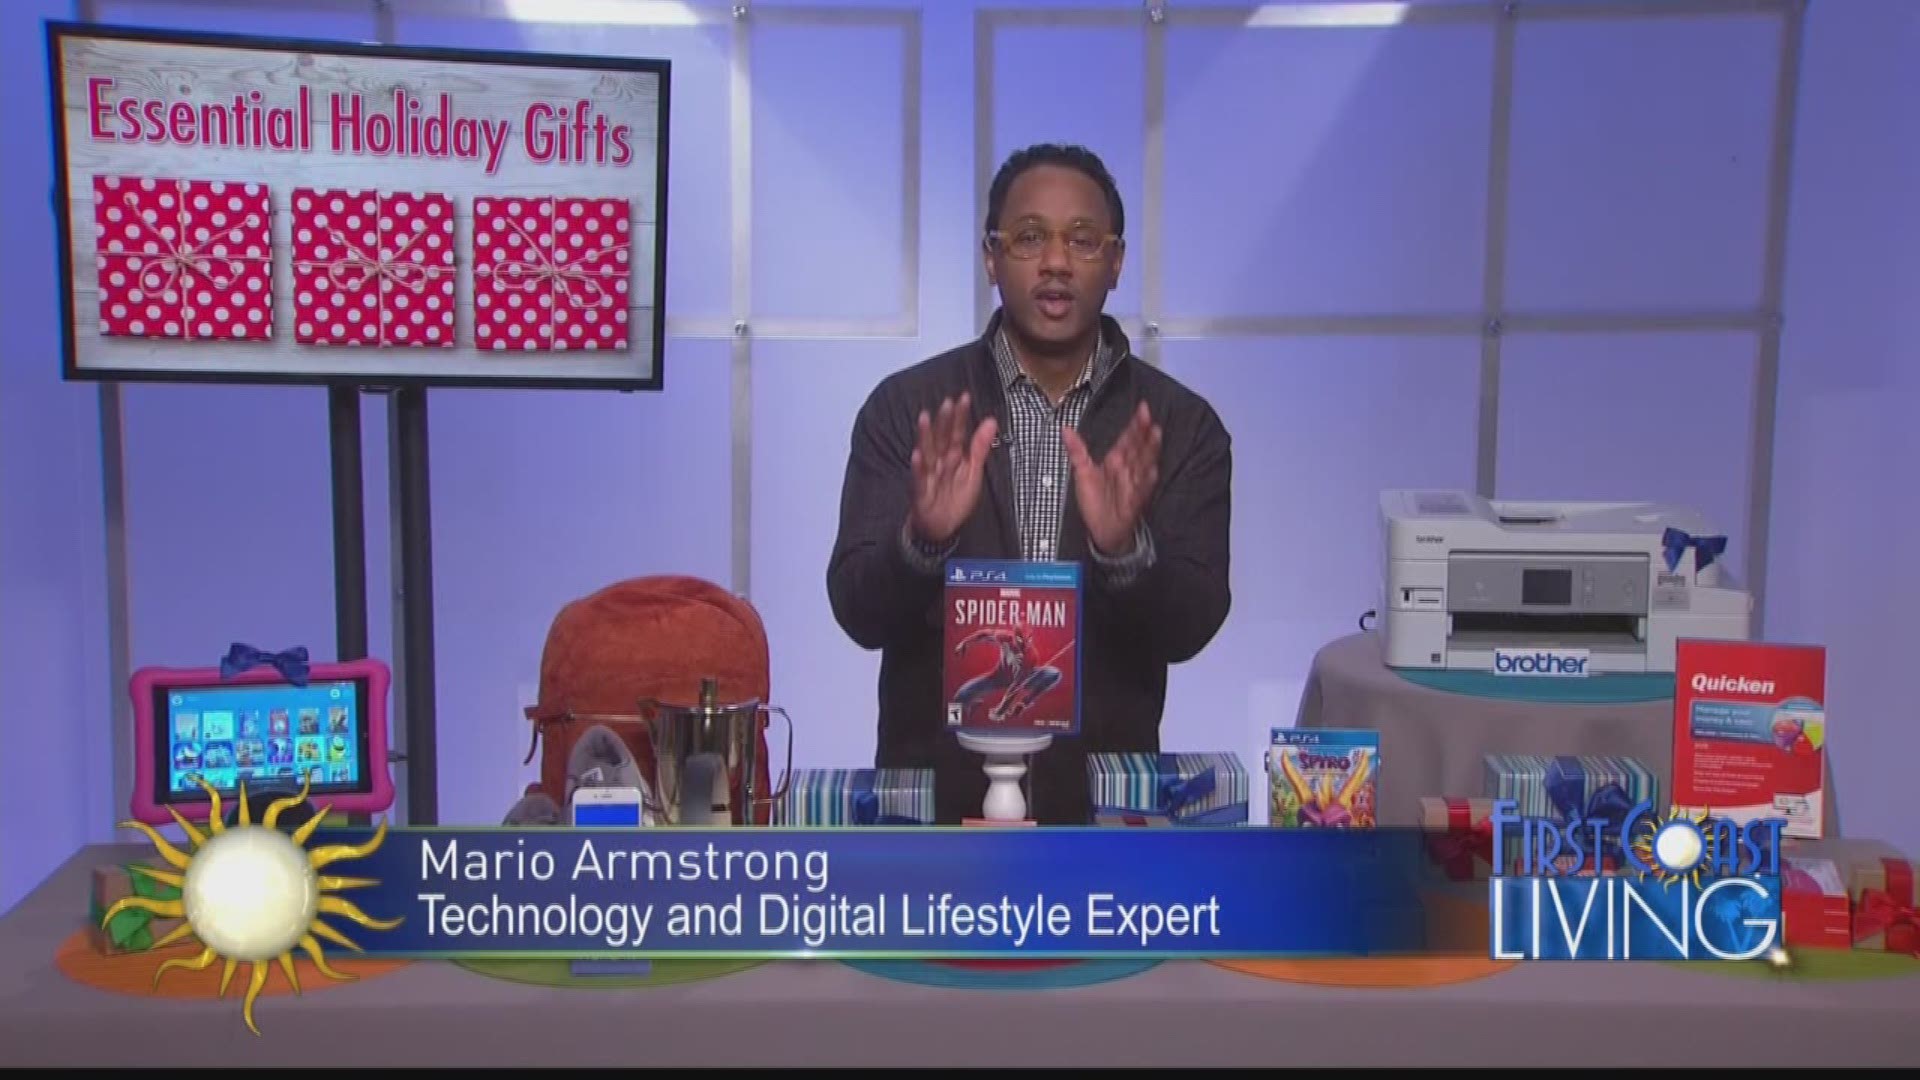 Tech and digital holiday gifts with Mario Armstrong.